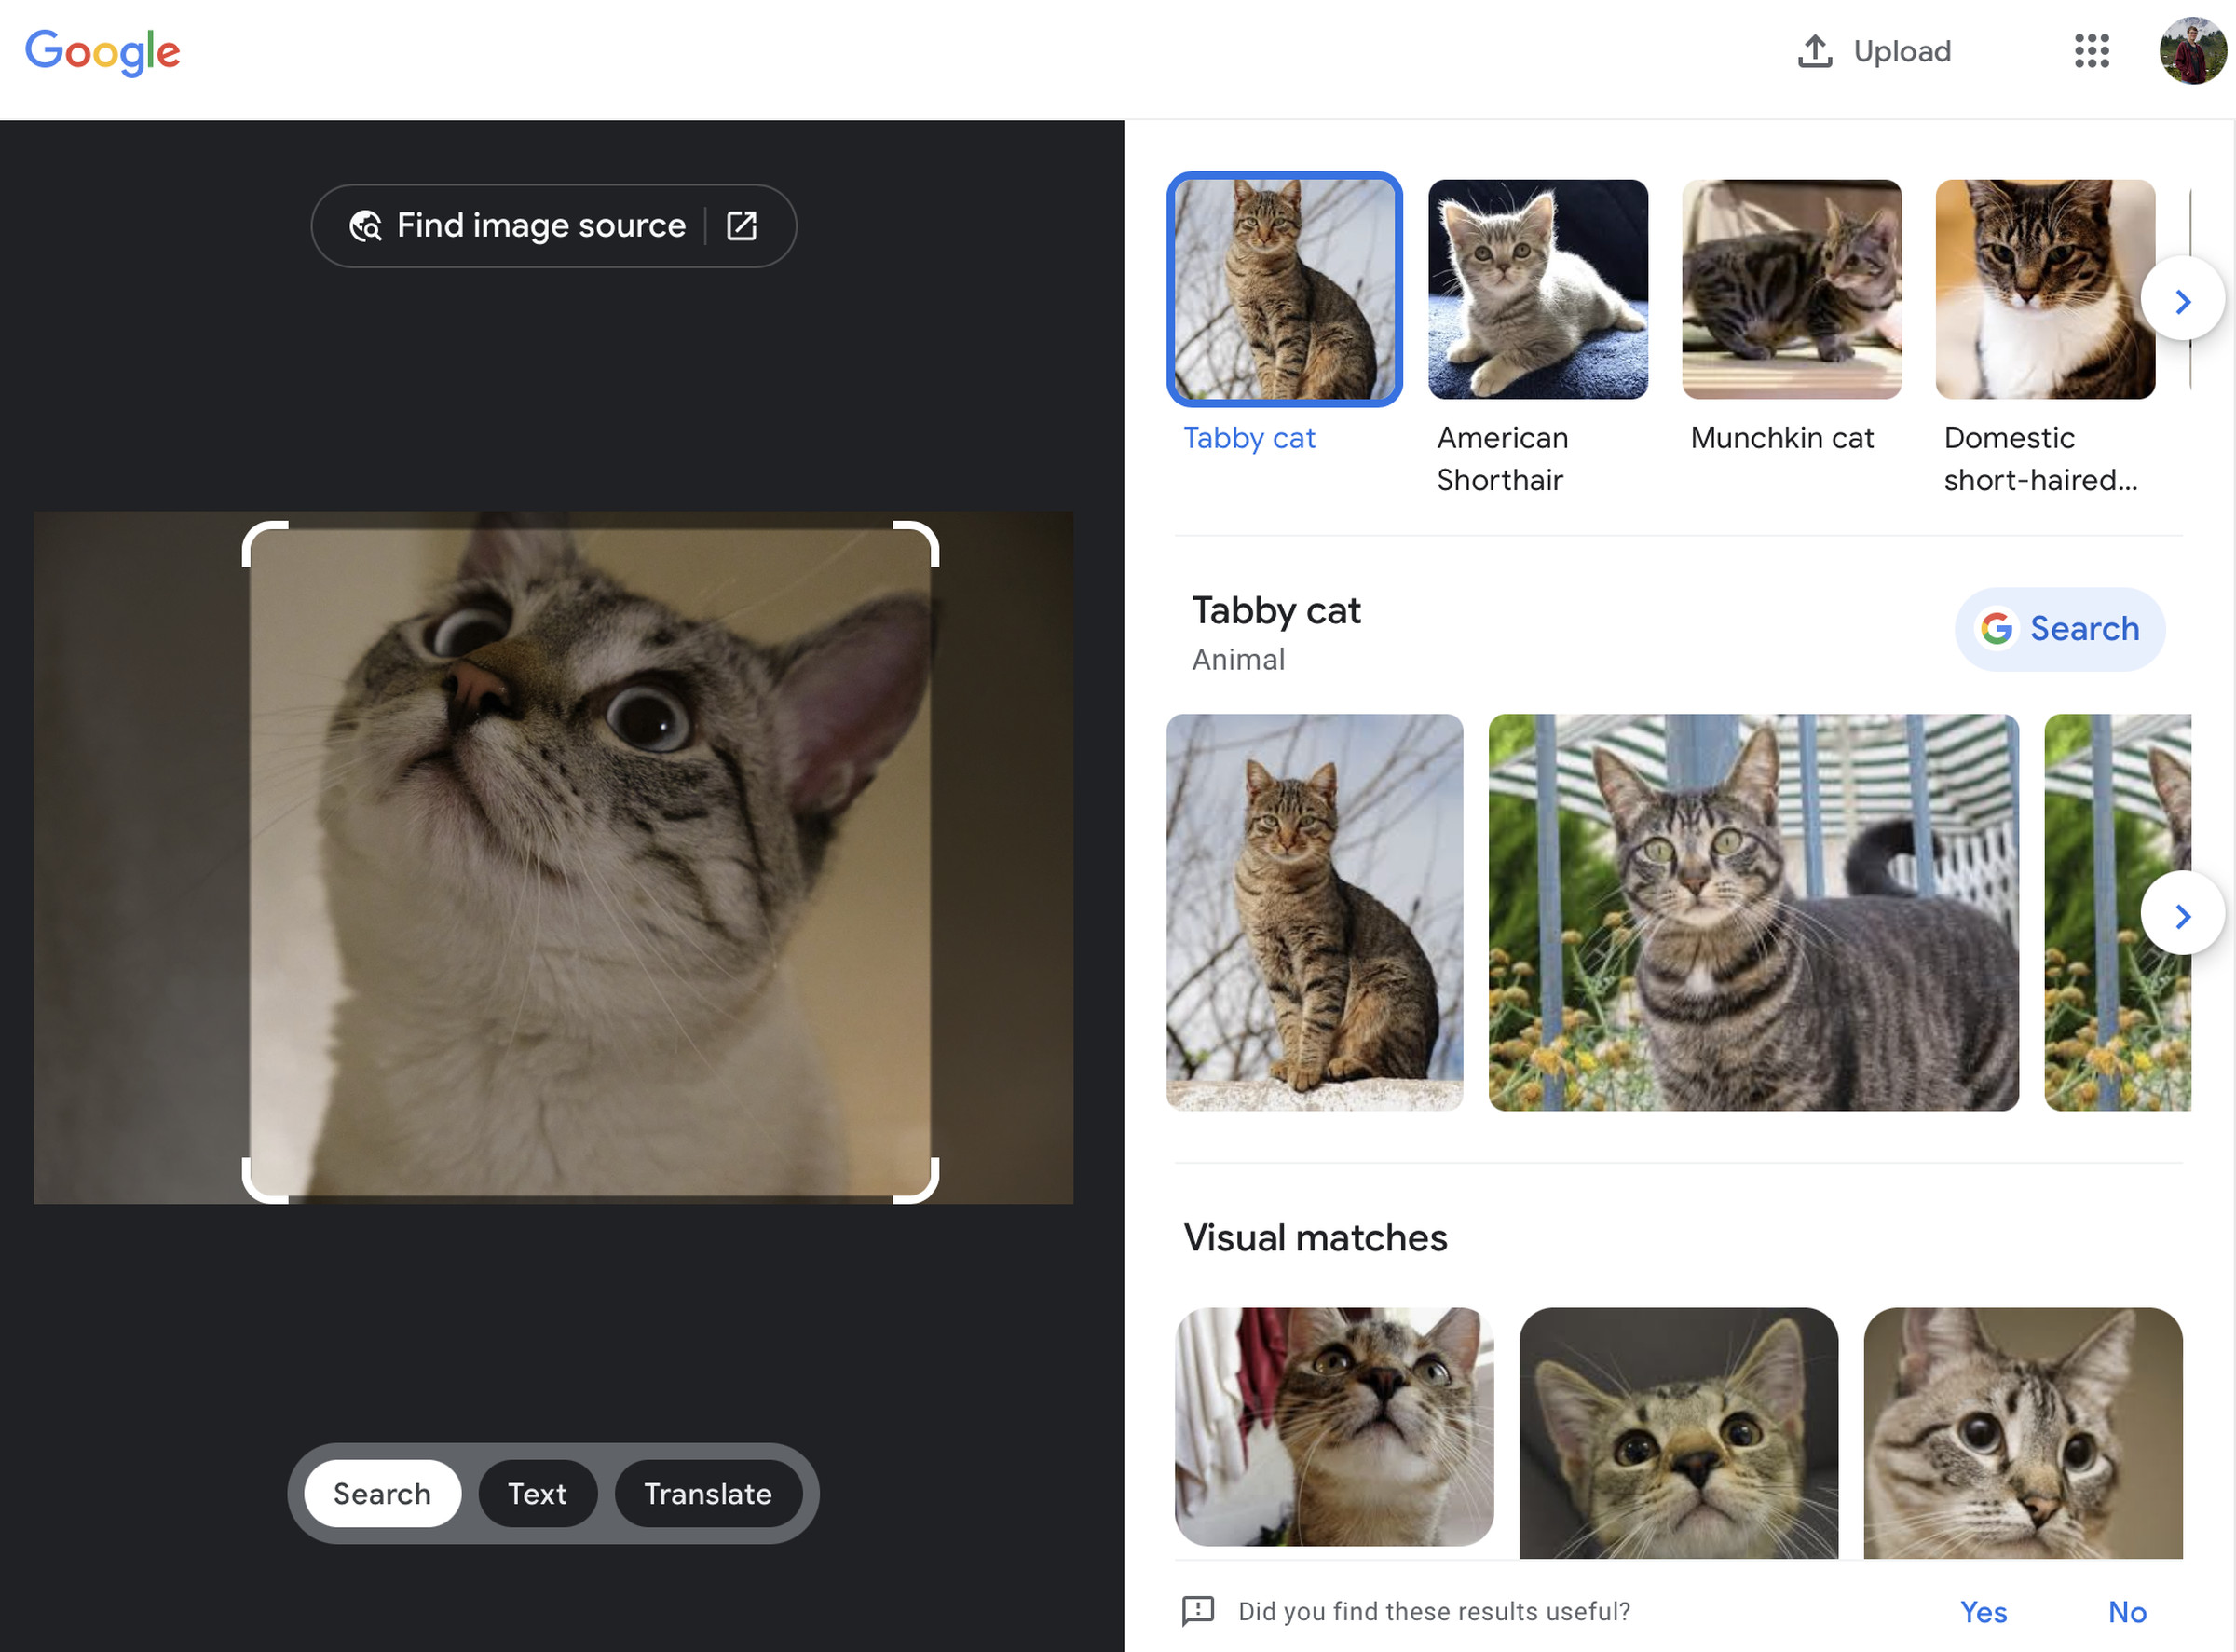 Screenshot of Google Lens scanning a picture of a cat, and showing search and image results for other cats.